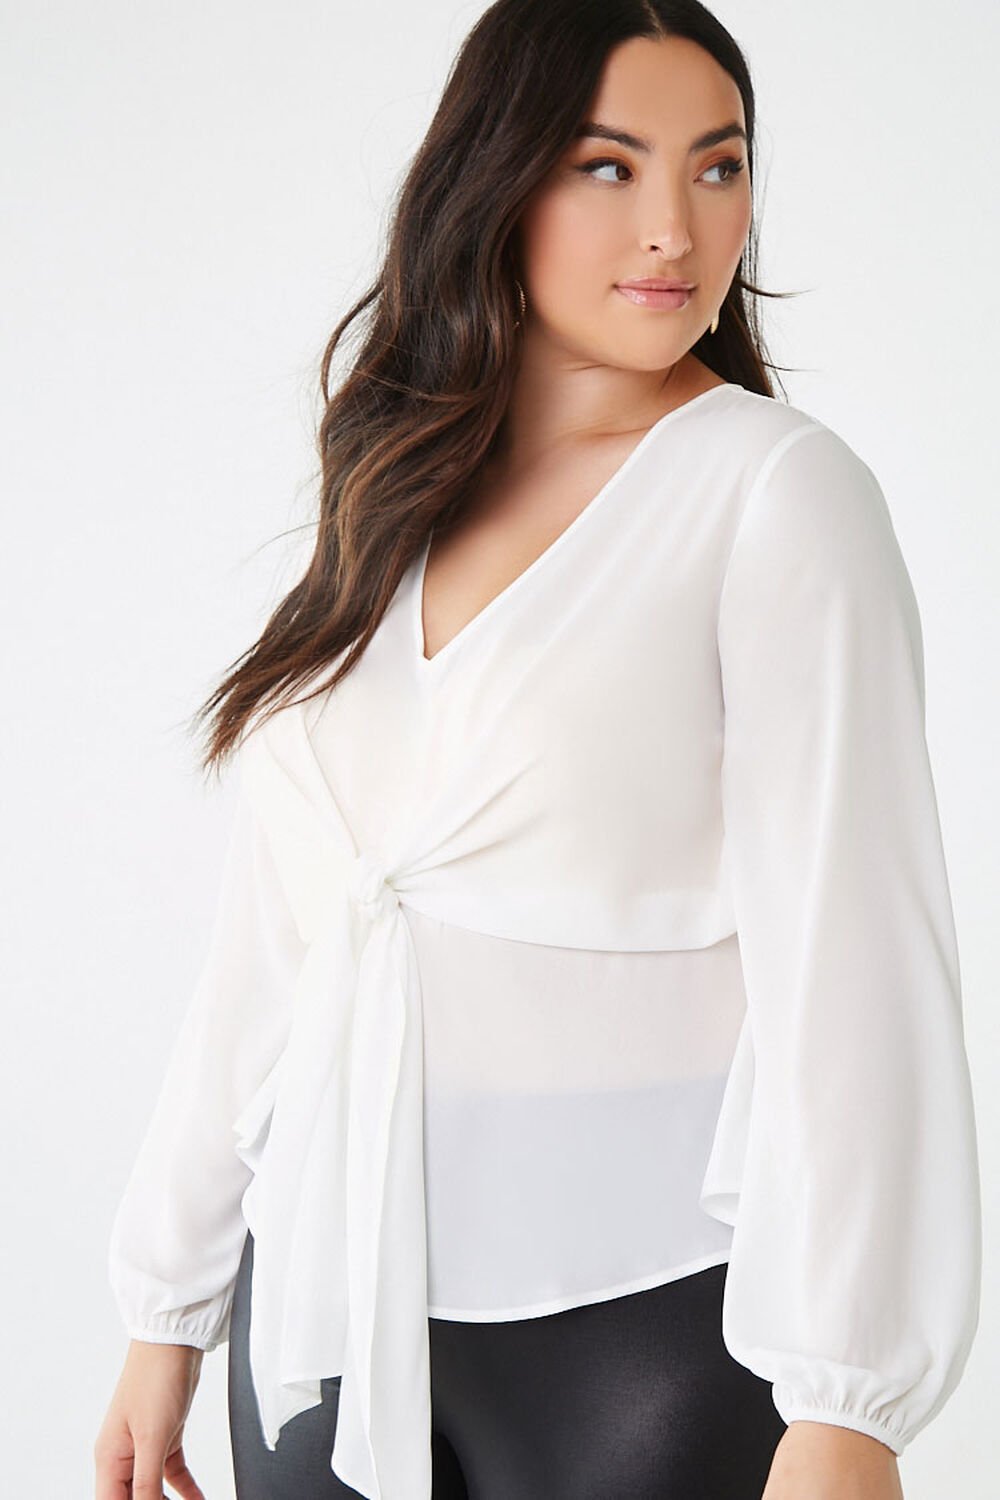 Plus Size Knotted Top